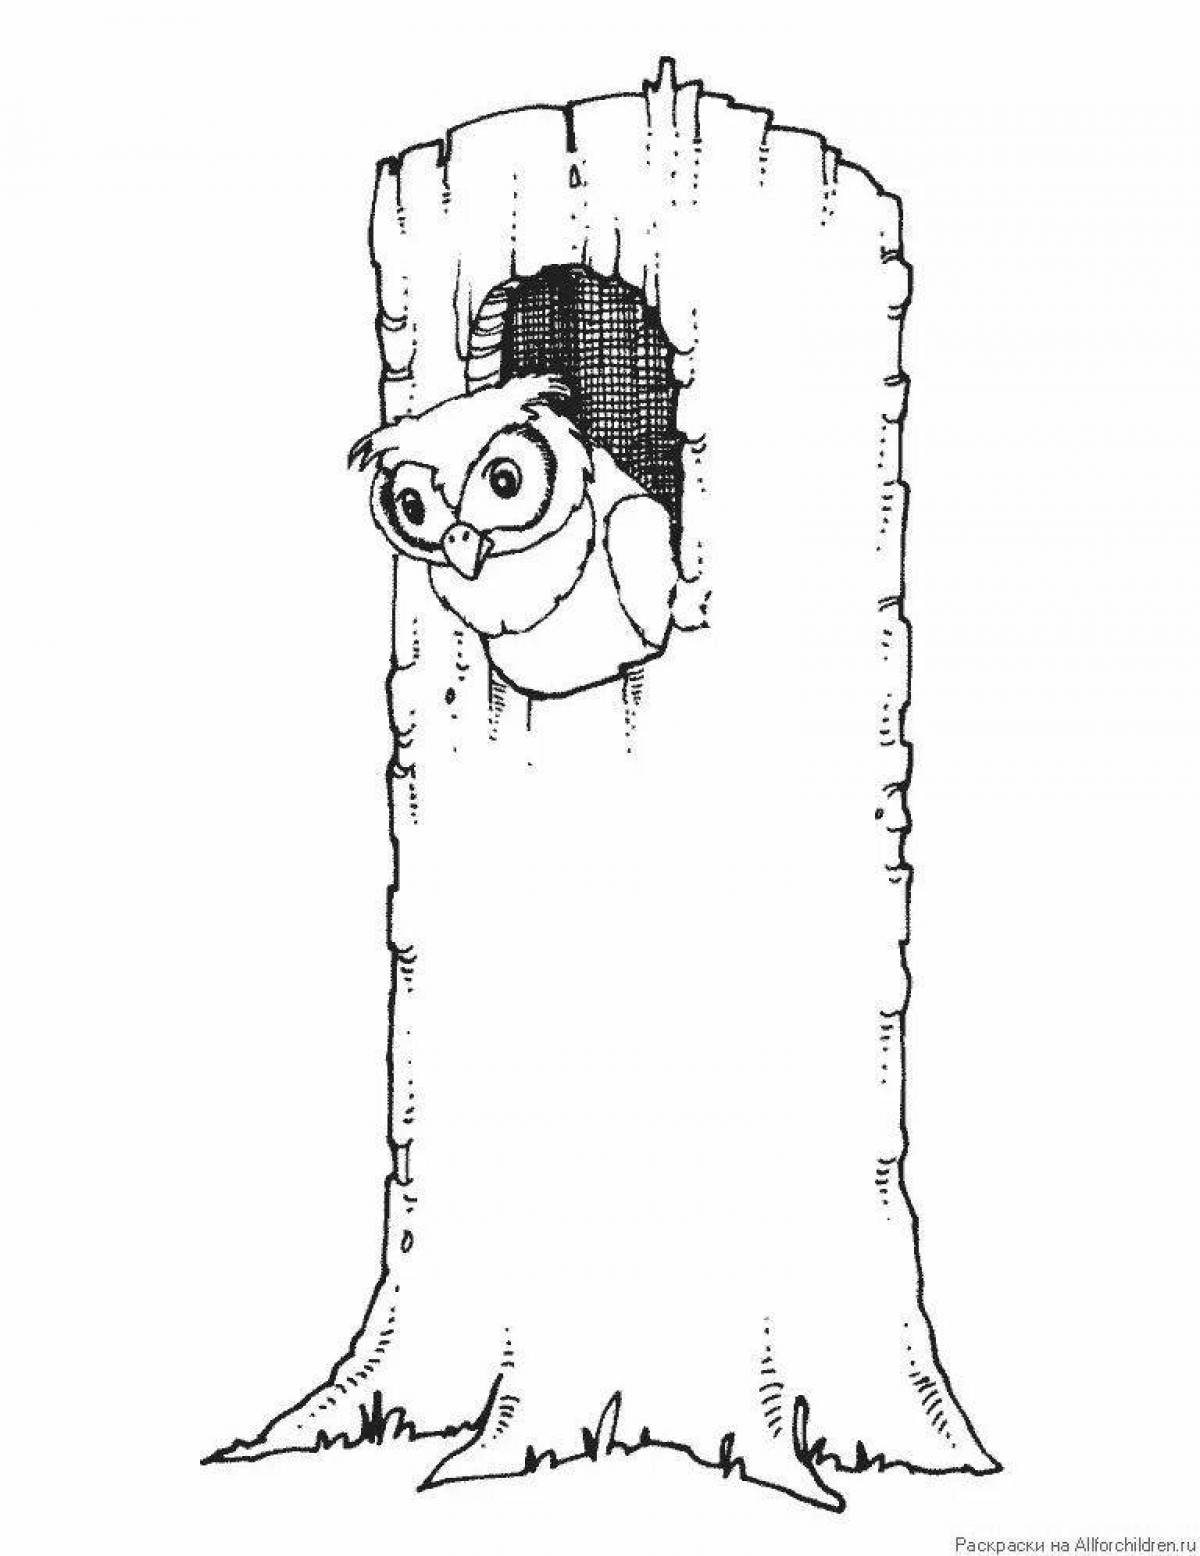 Owl in the hollow #13